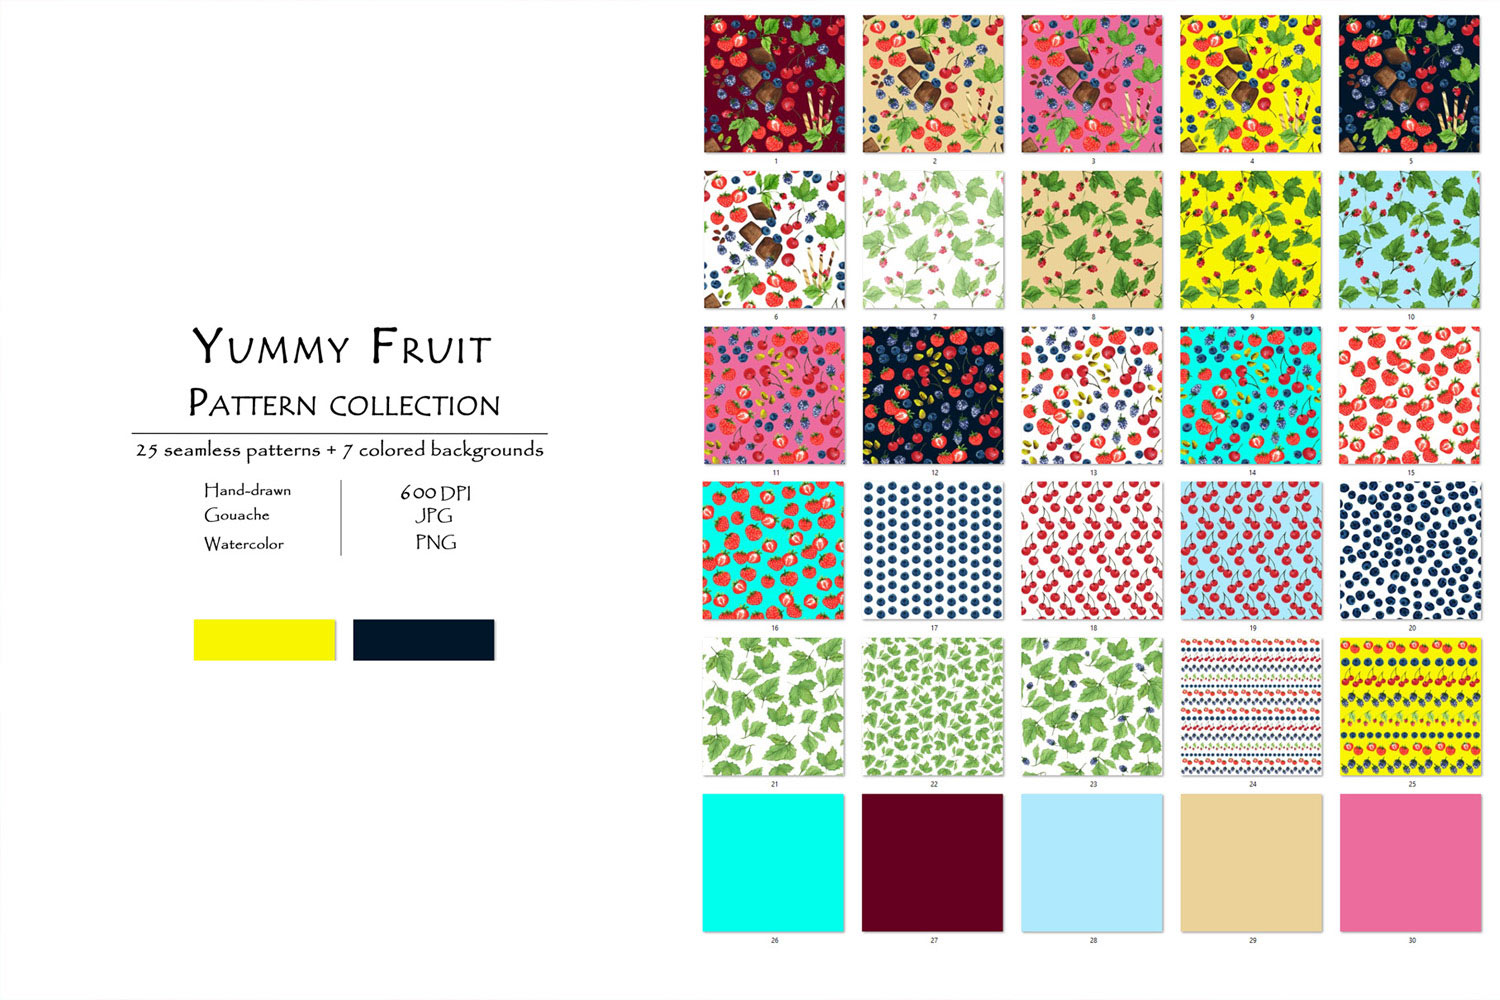 Yummy Fruit Pattern Collection With 25 Seamless Patterns And 7 Backgrounds.